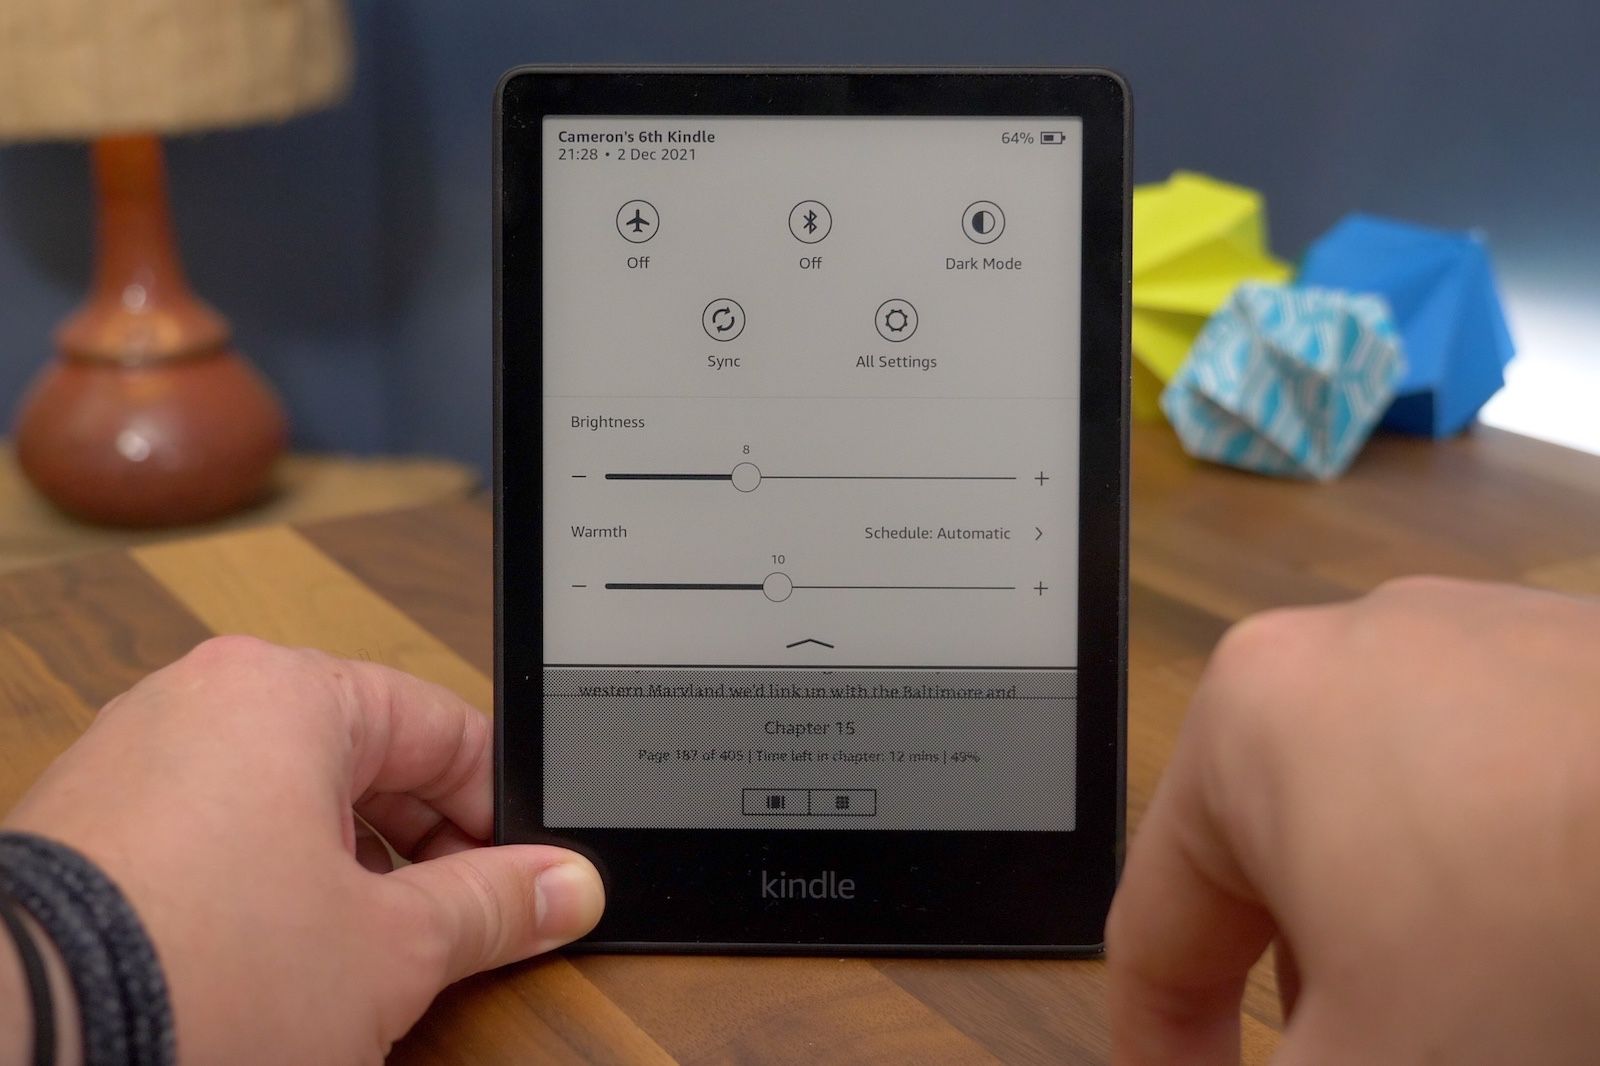 Kindle Paperwhite tips and tricks: Master your e-reader